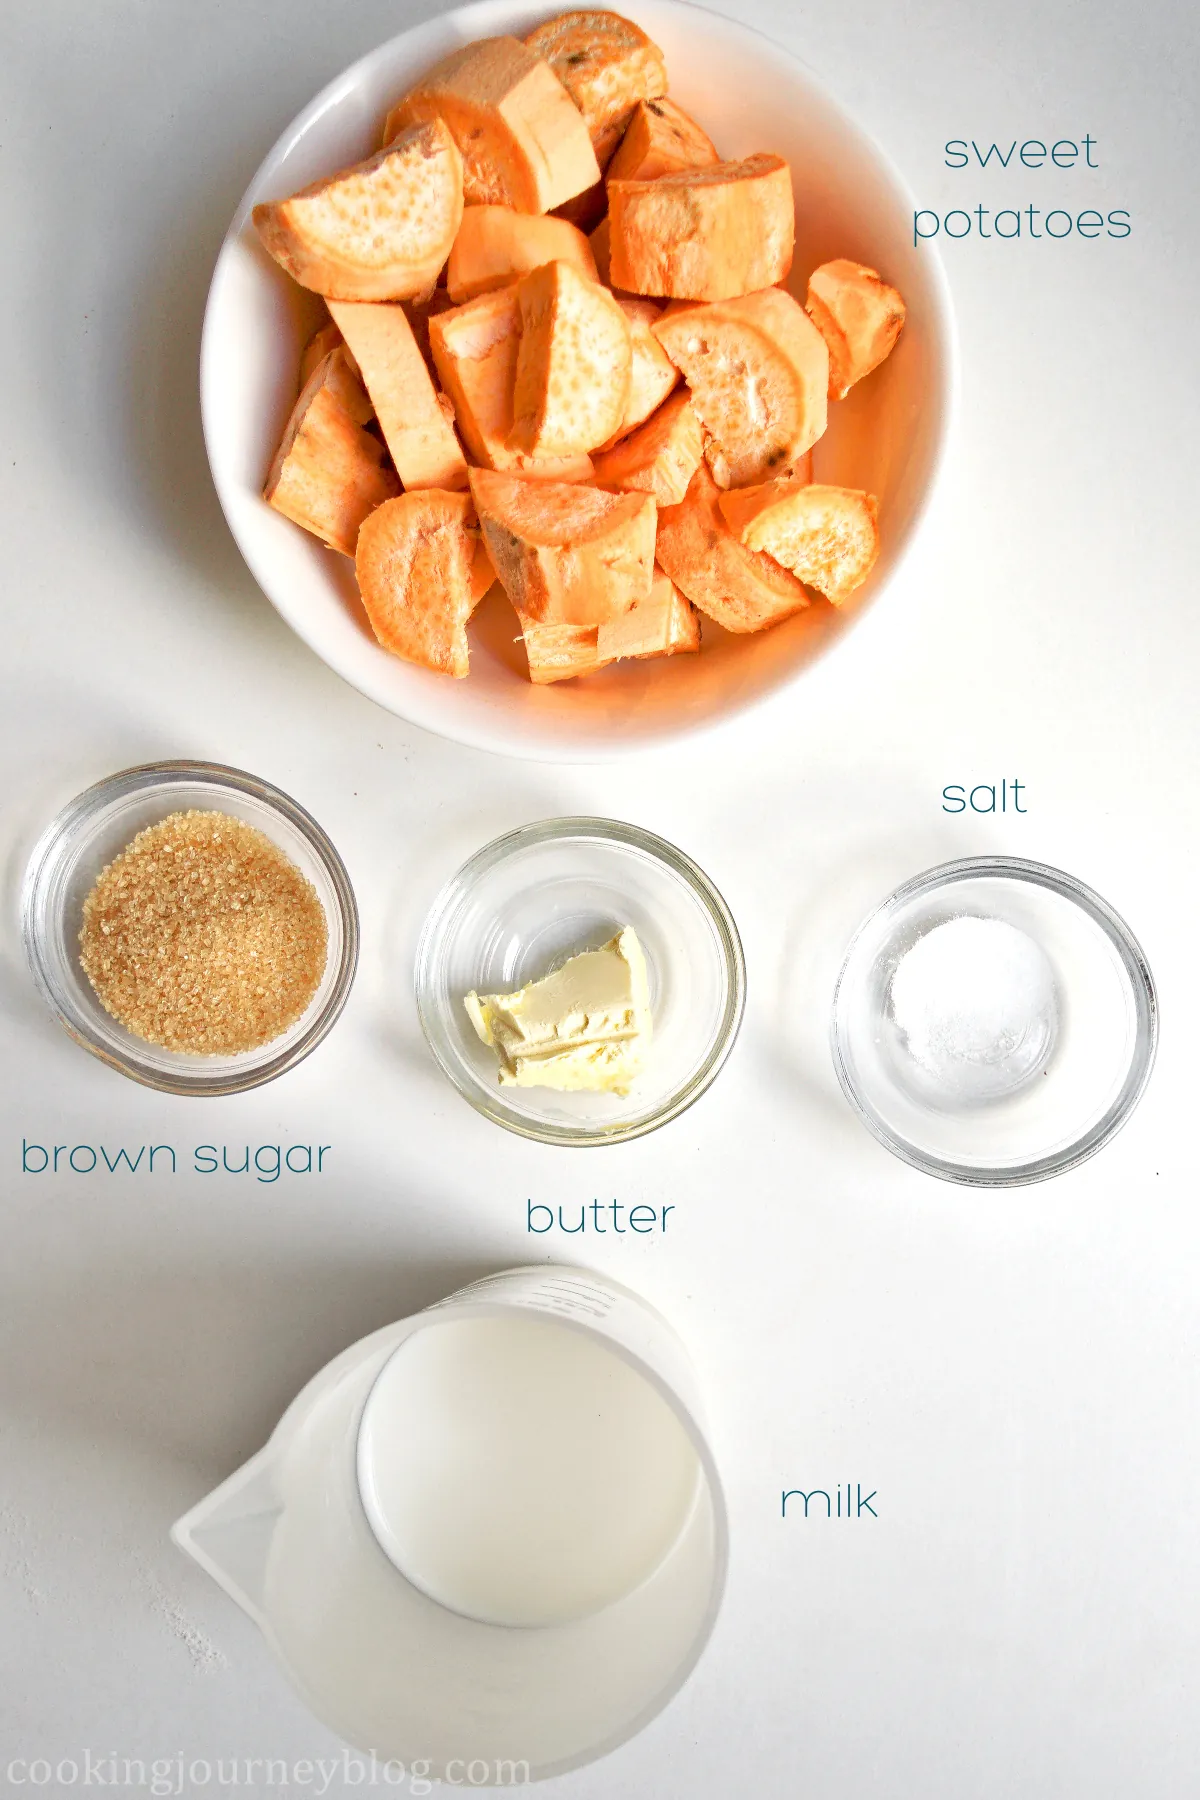 Ingredients for mashed sweet potatoes: sweet potatoes, brown sugar, butter, salt and milk